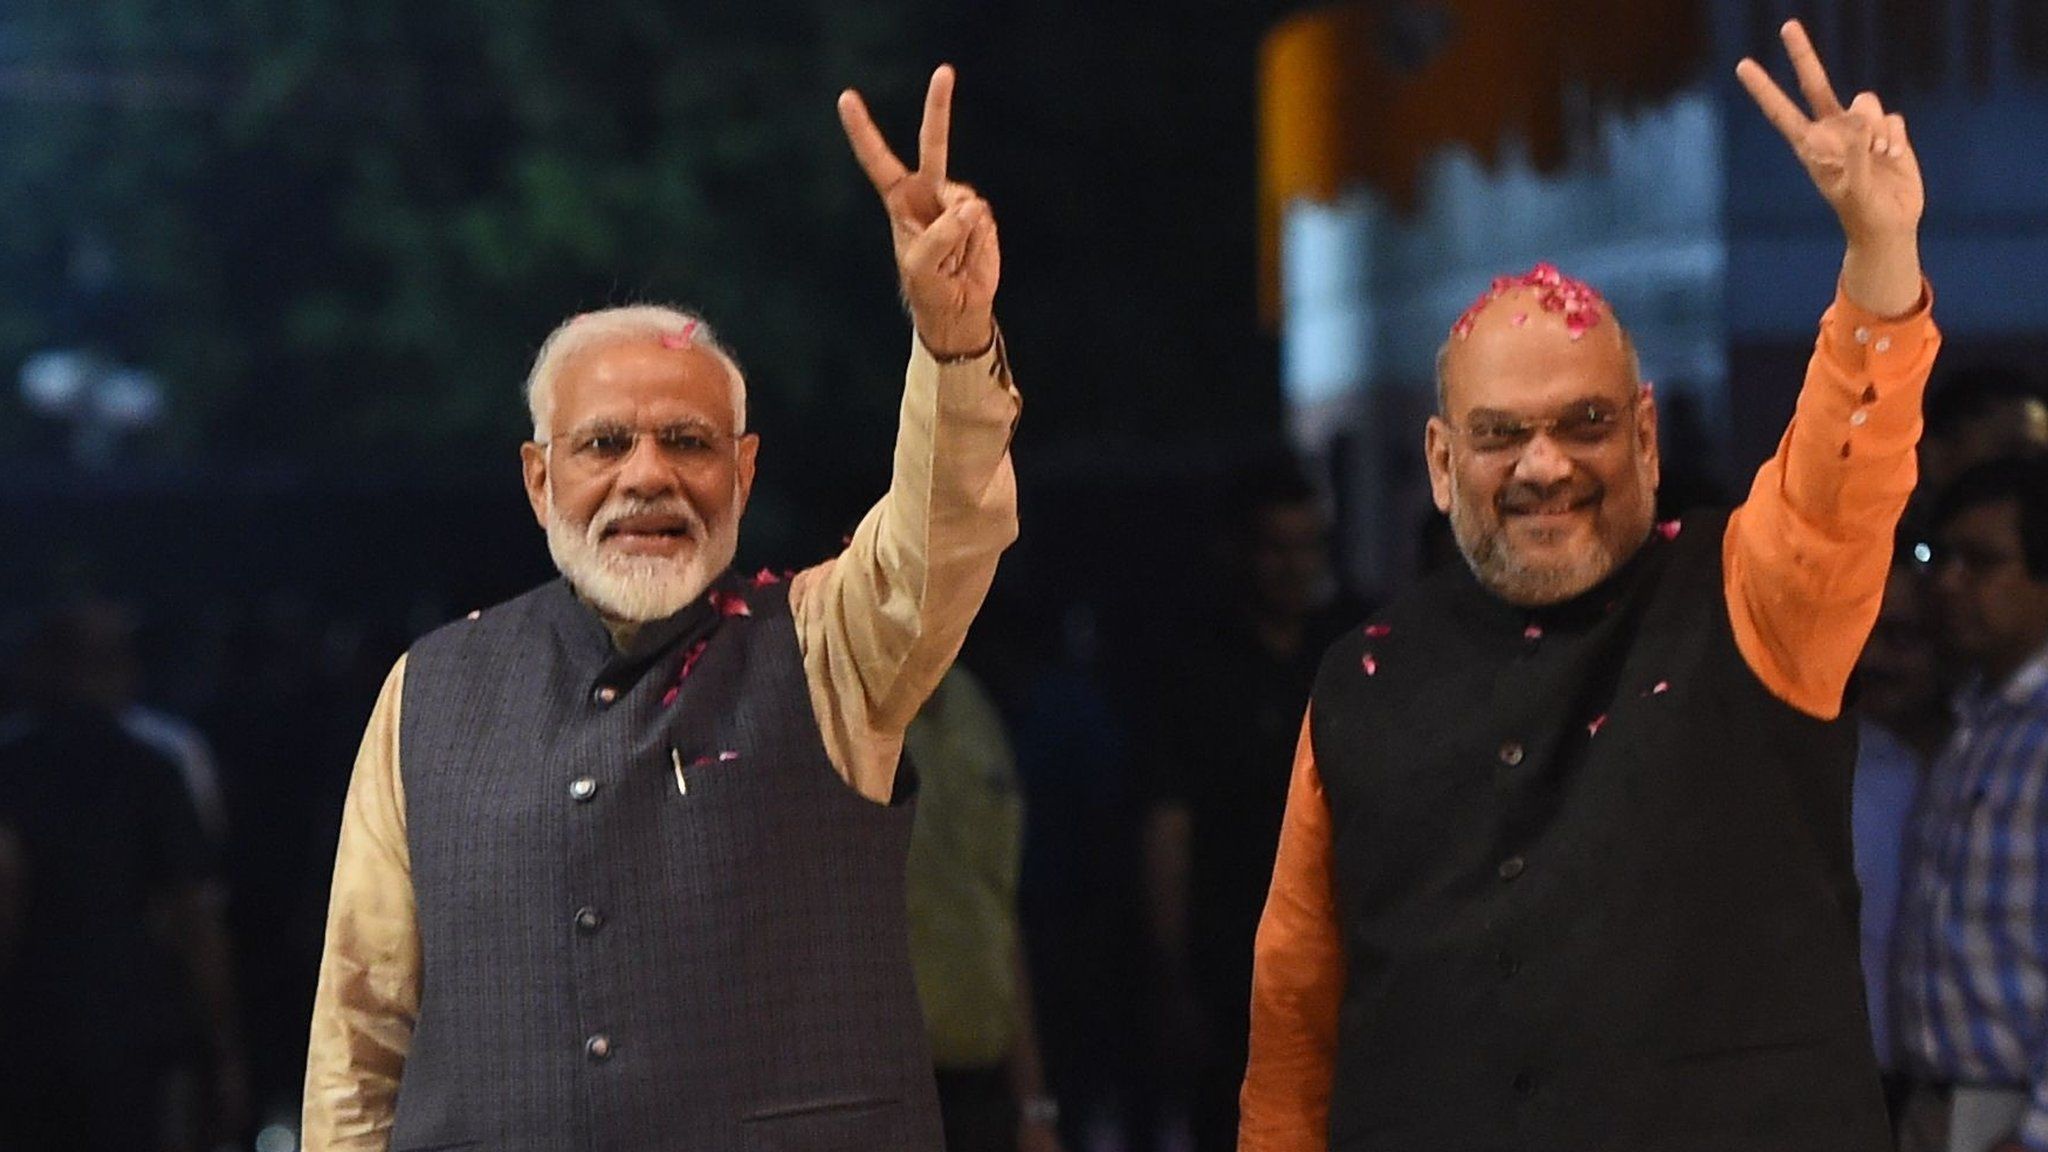 Indian Prime Minister Narendra Modi (L) and president of the ruling Bharatiya Janata Party (BJP) Amit Shah gesture as they celebrate the victory in India"s general elections, in New Delhi on May 23, 2019.